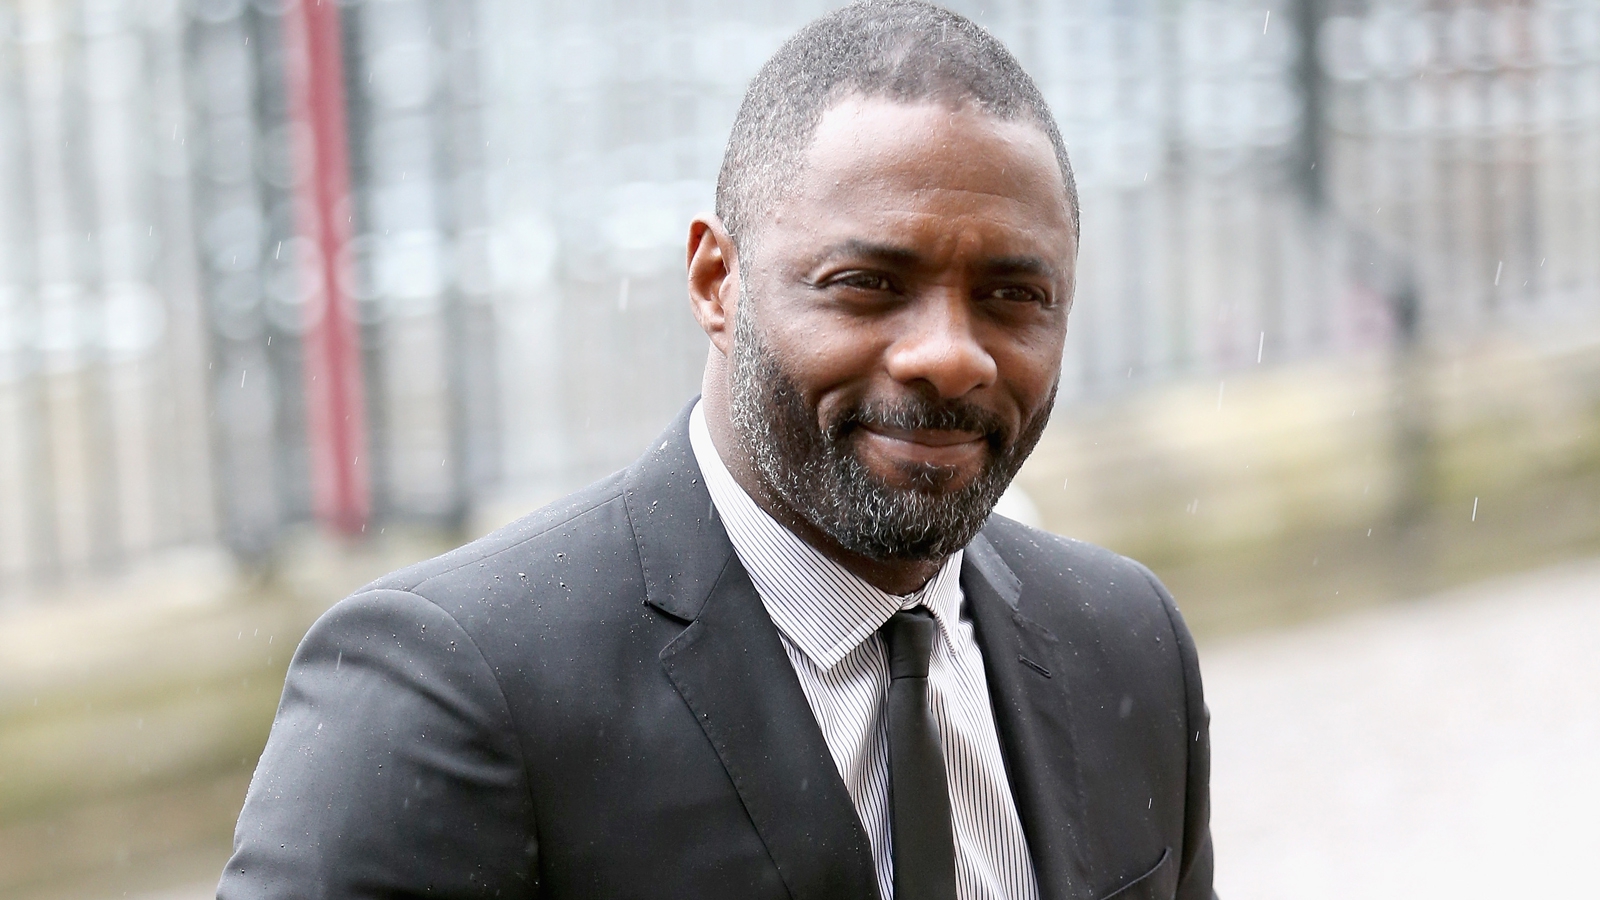 Leaked Sony emails revealed that Idris Elba was under "serious con...